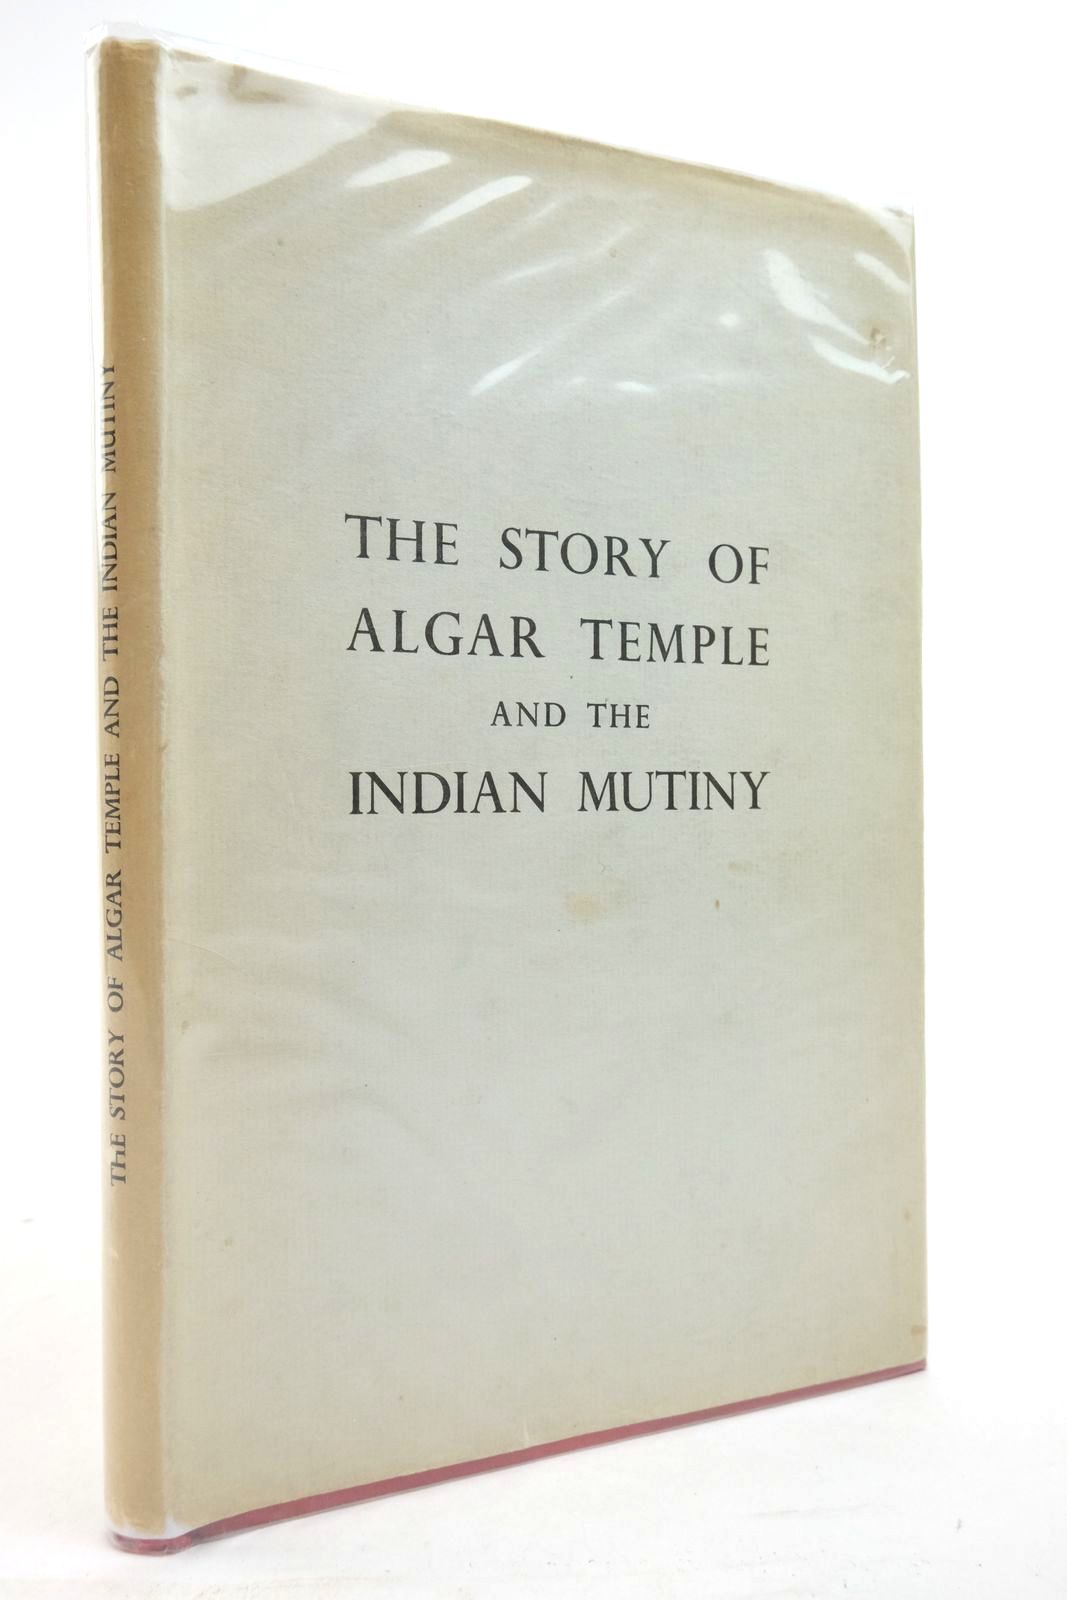 Photo of THE STORY OF ALGAR TEMPLE AND THE INDIAN MUTINY written by Temple, Algar Picton-Turbervill, Edith (STOCK CODE: 2138001)  for sale by Stella & Rose's Books